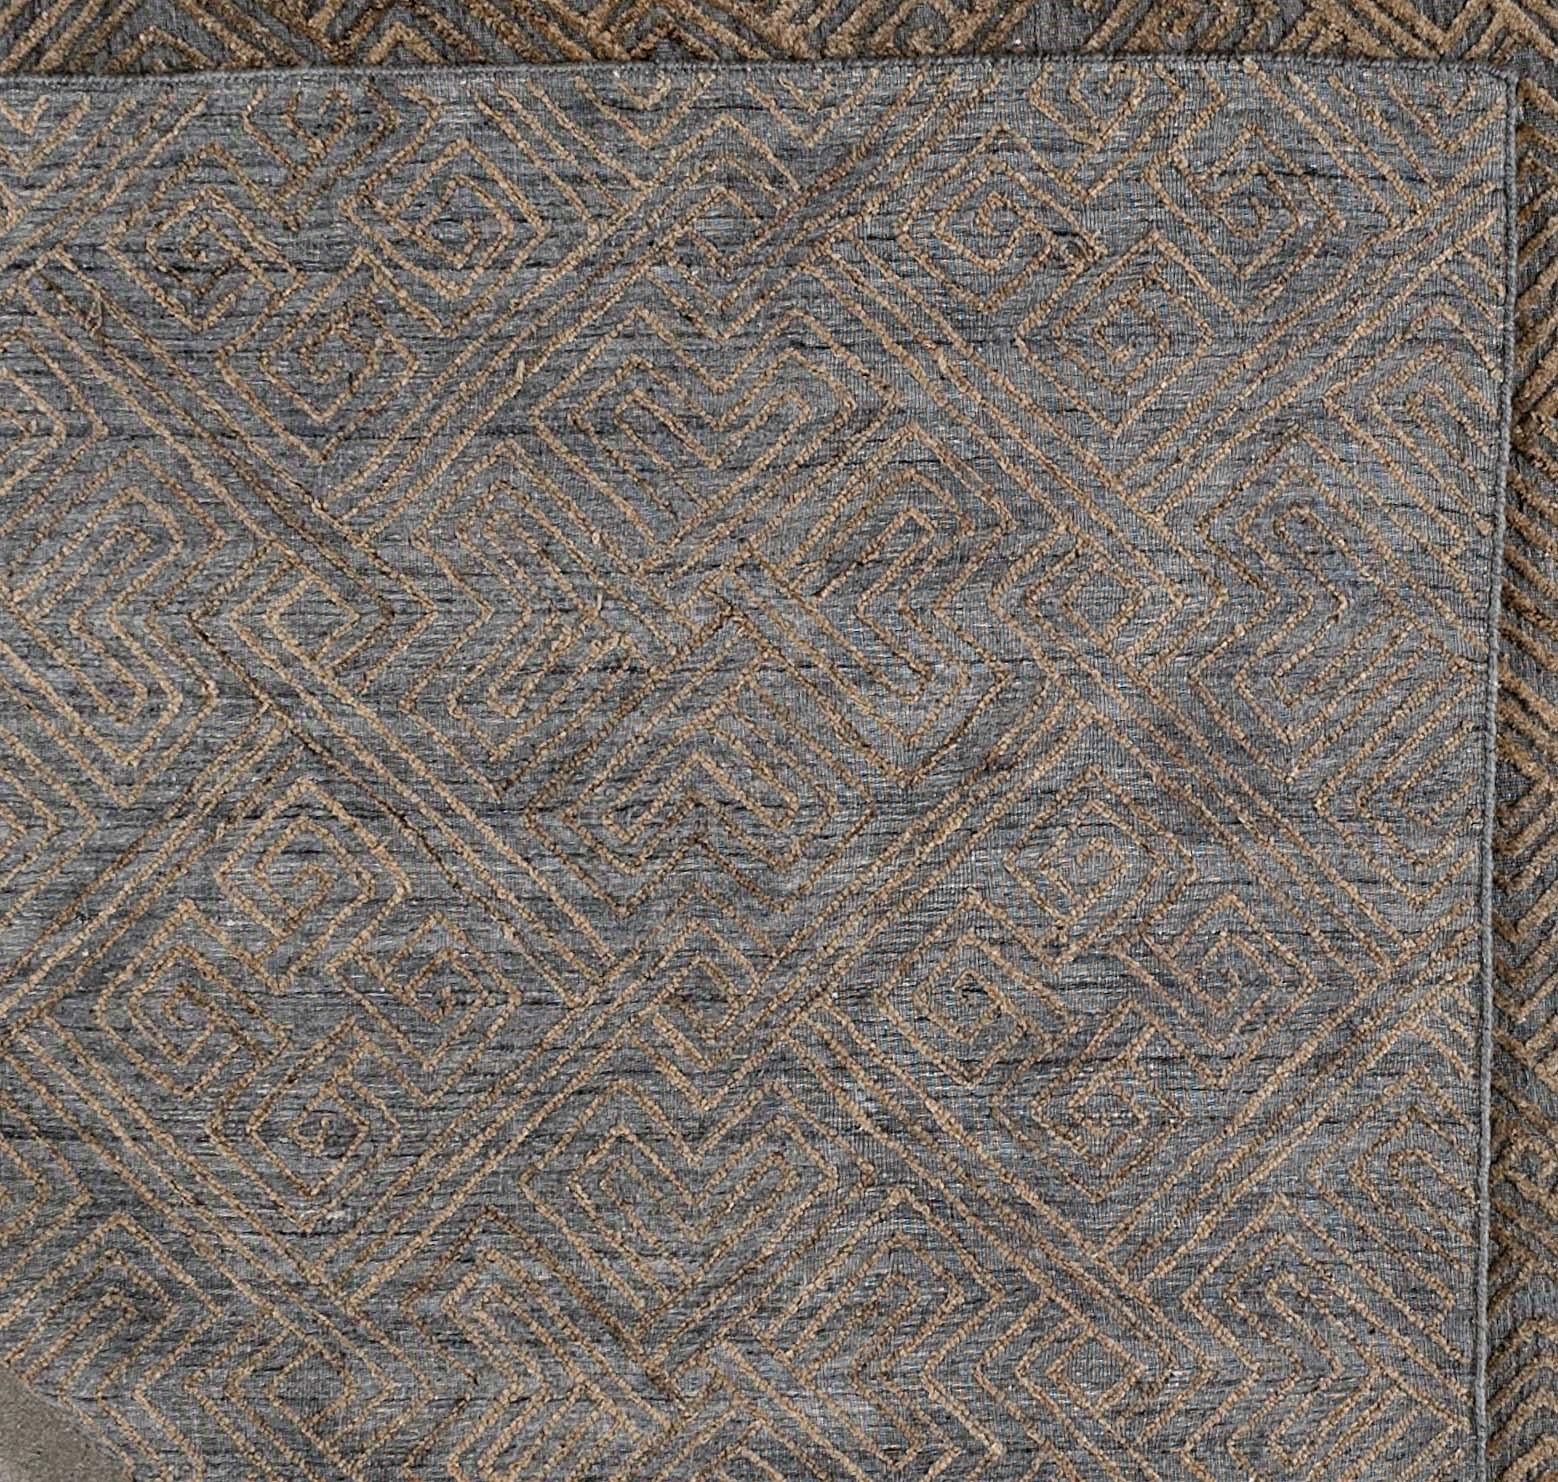 Hexagon high low contemporary rug in warm gray.

High low design giving a casual yet polished look. With neutral color and raised geometry pattern.